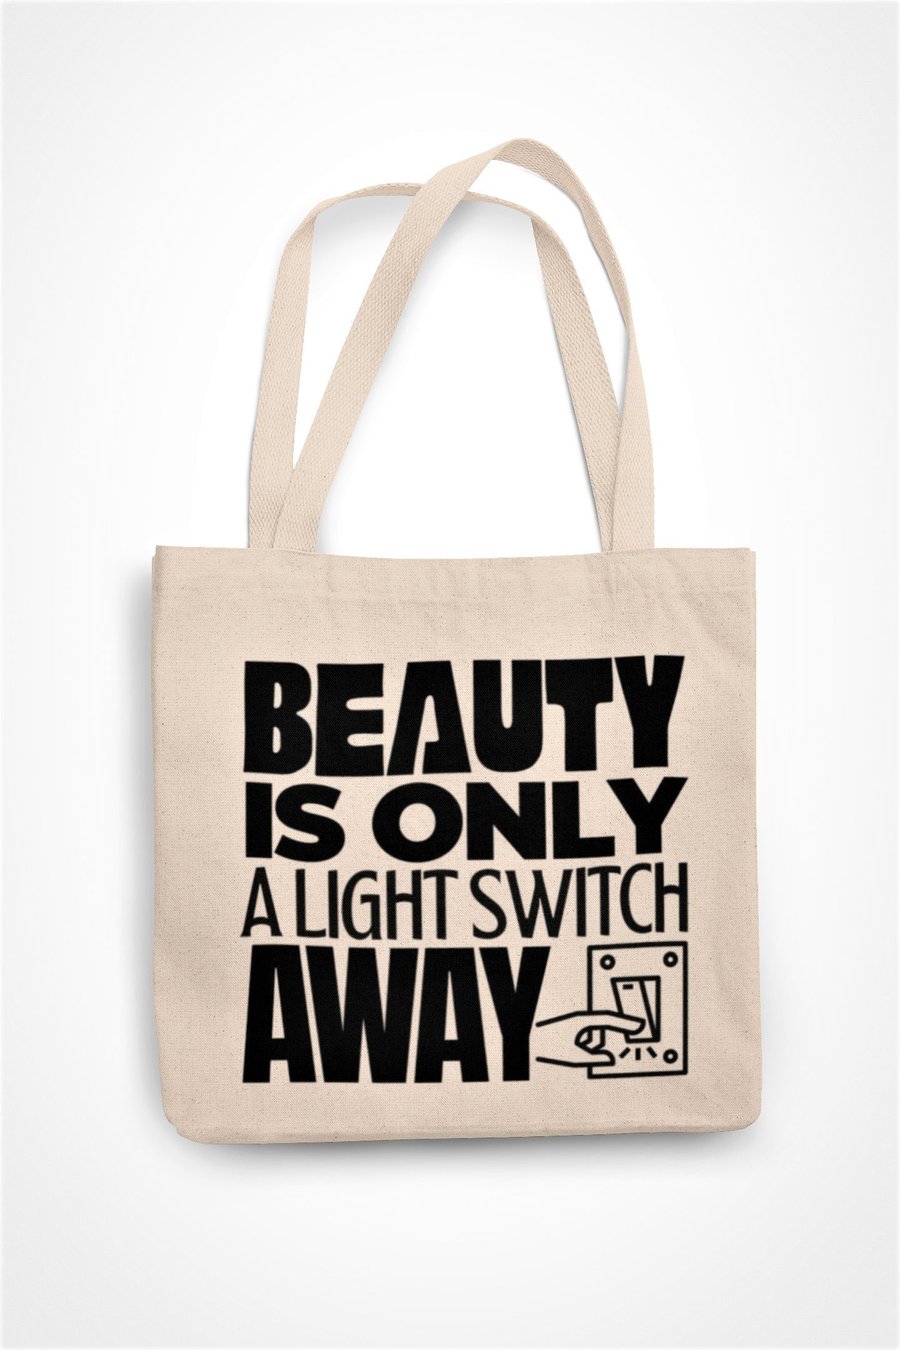 Beauty Is Only A Light Switch Away Tote Bag Funny Sarcastic Novelty Shopping Bag